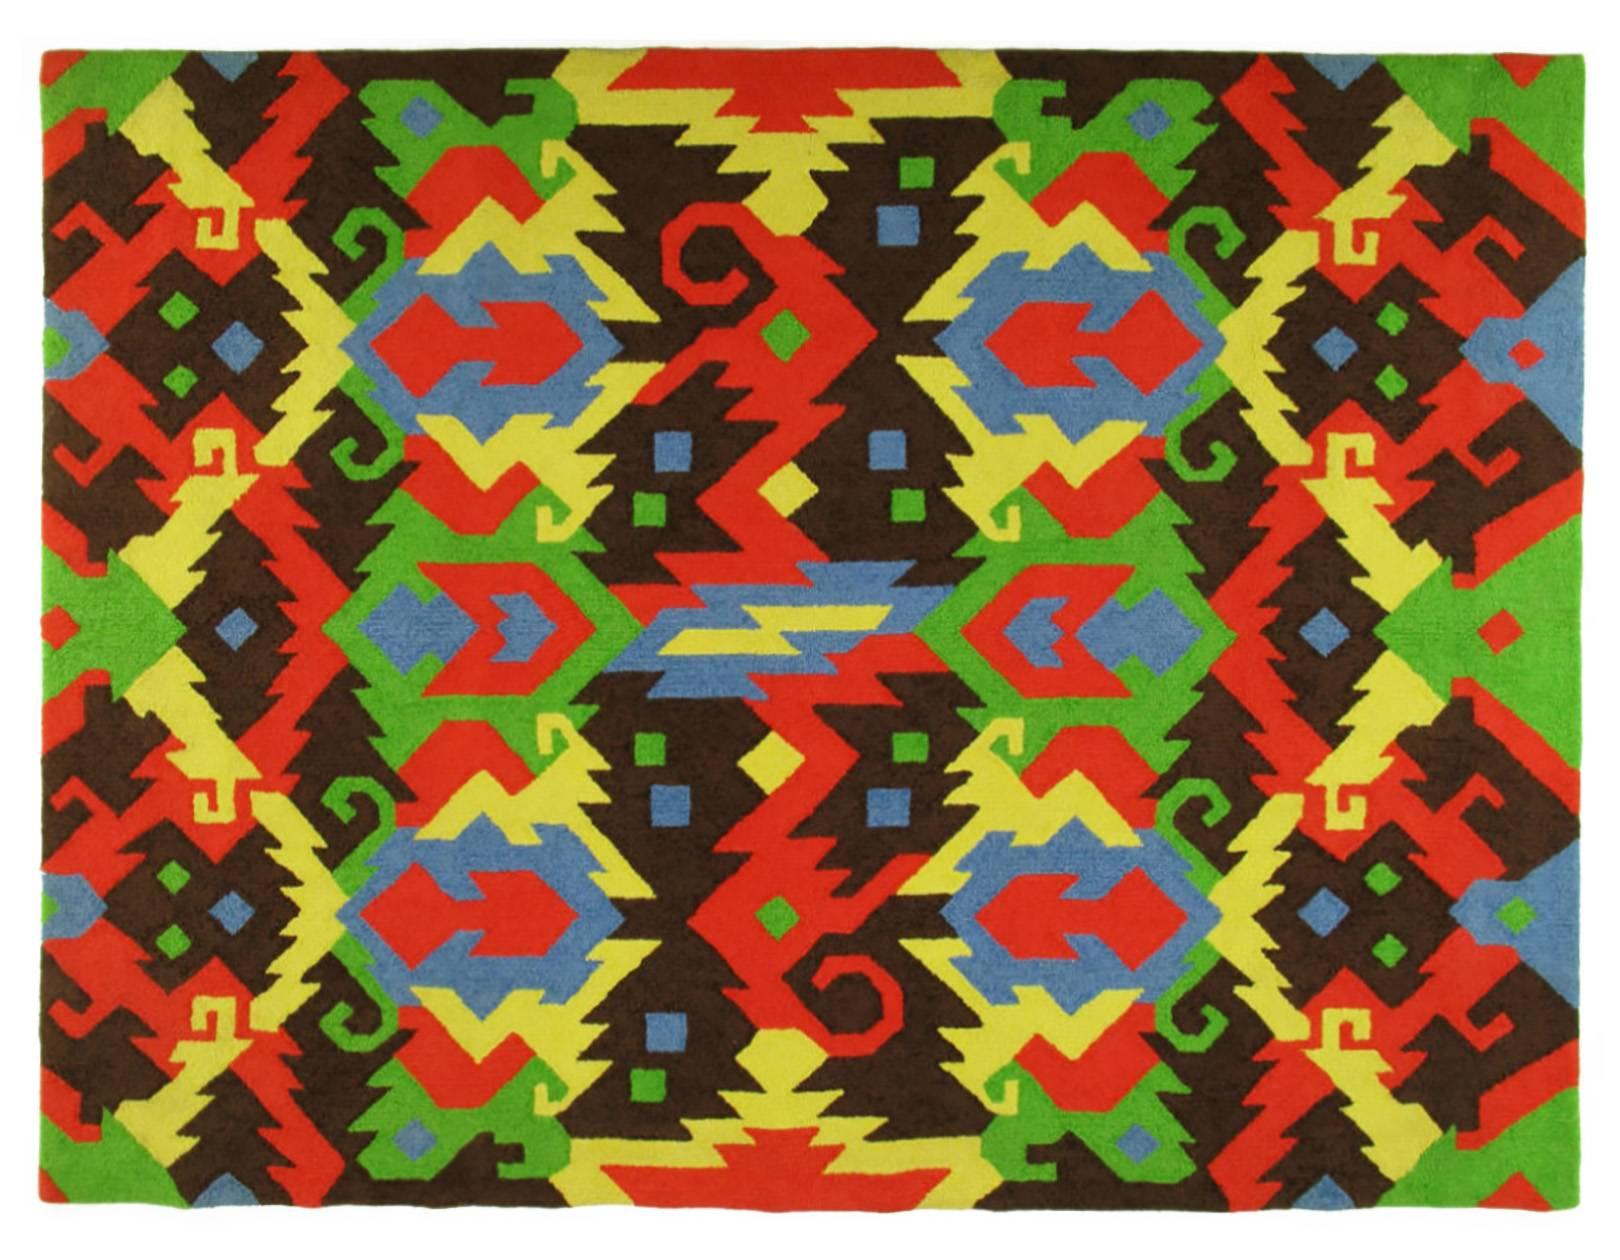 Pair of 1972 Edward Fields Colorful Geometric Rugs In Excellent Condition For Sale In Chicago, IL